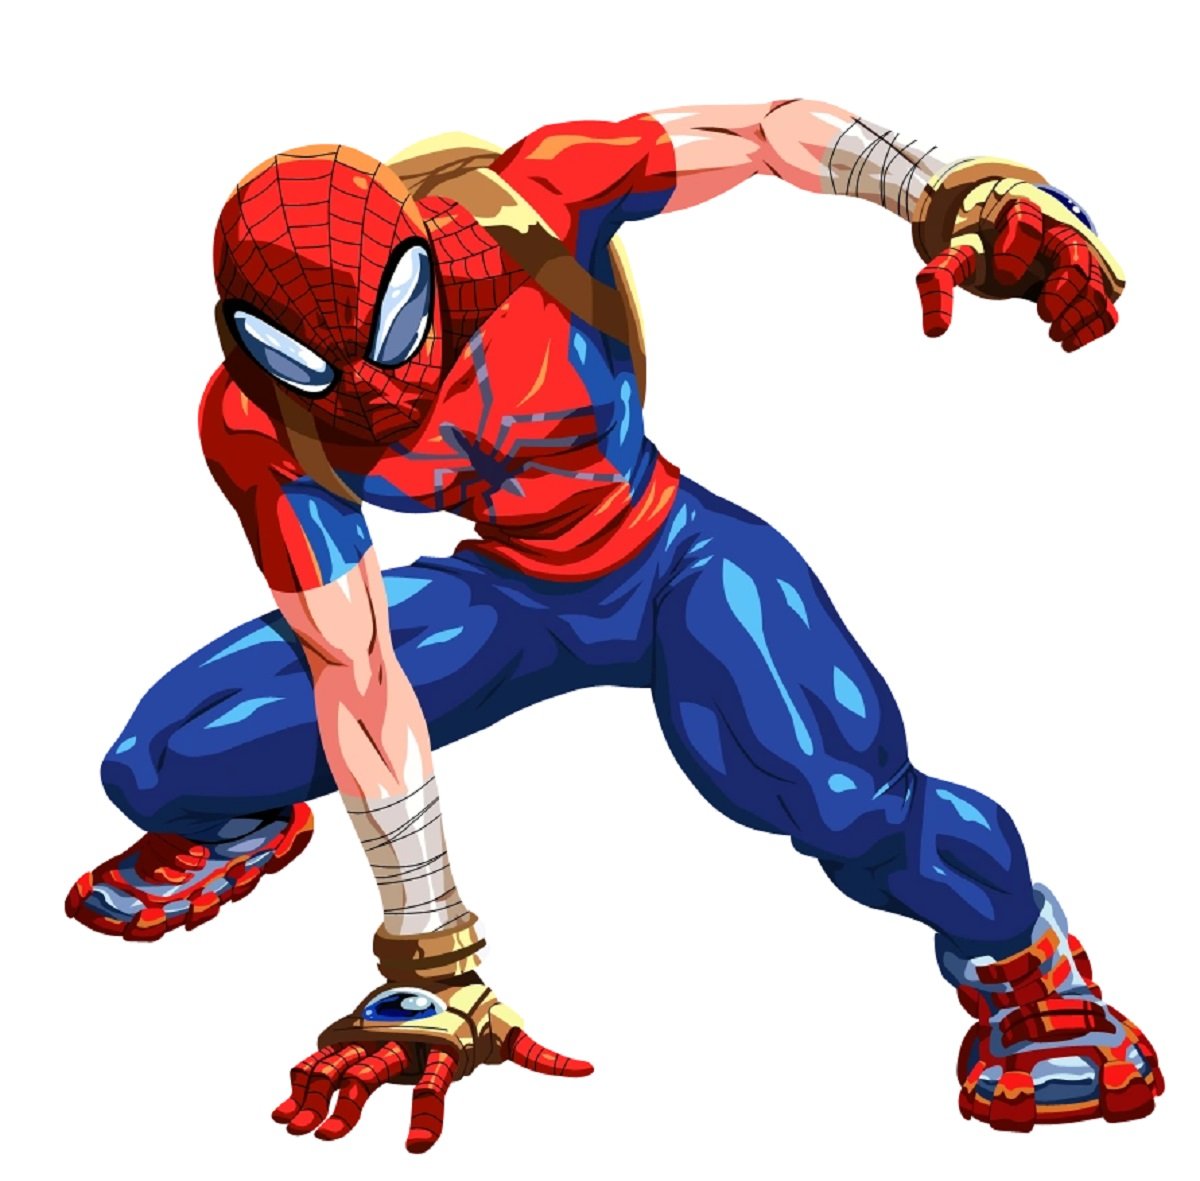 Mangaverse Spider-Man, a new Spider-Man Variant as seen in Across the Spider-Verse trailer.